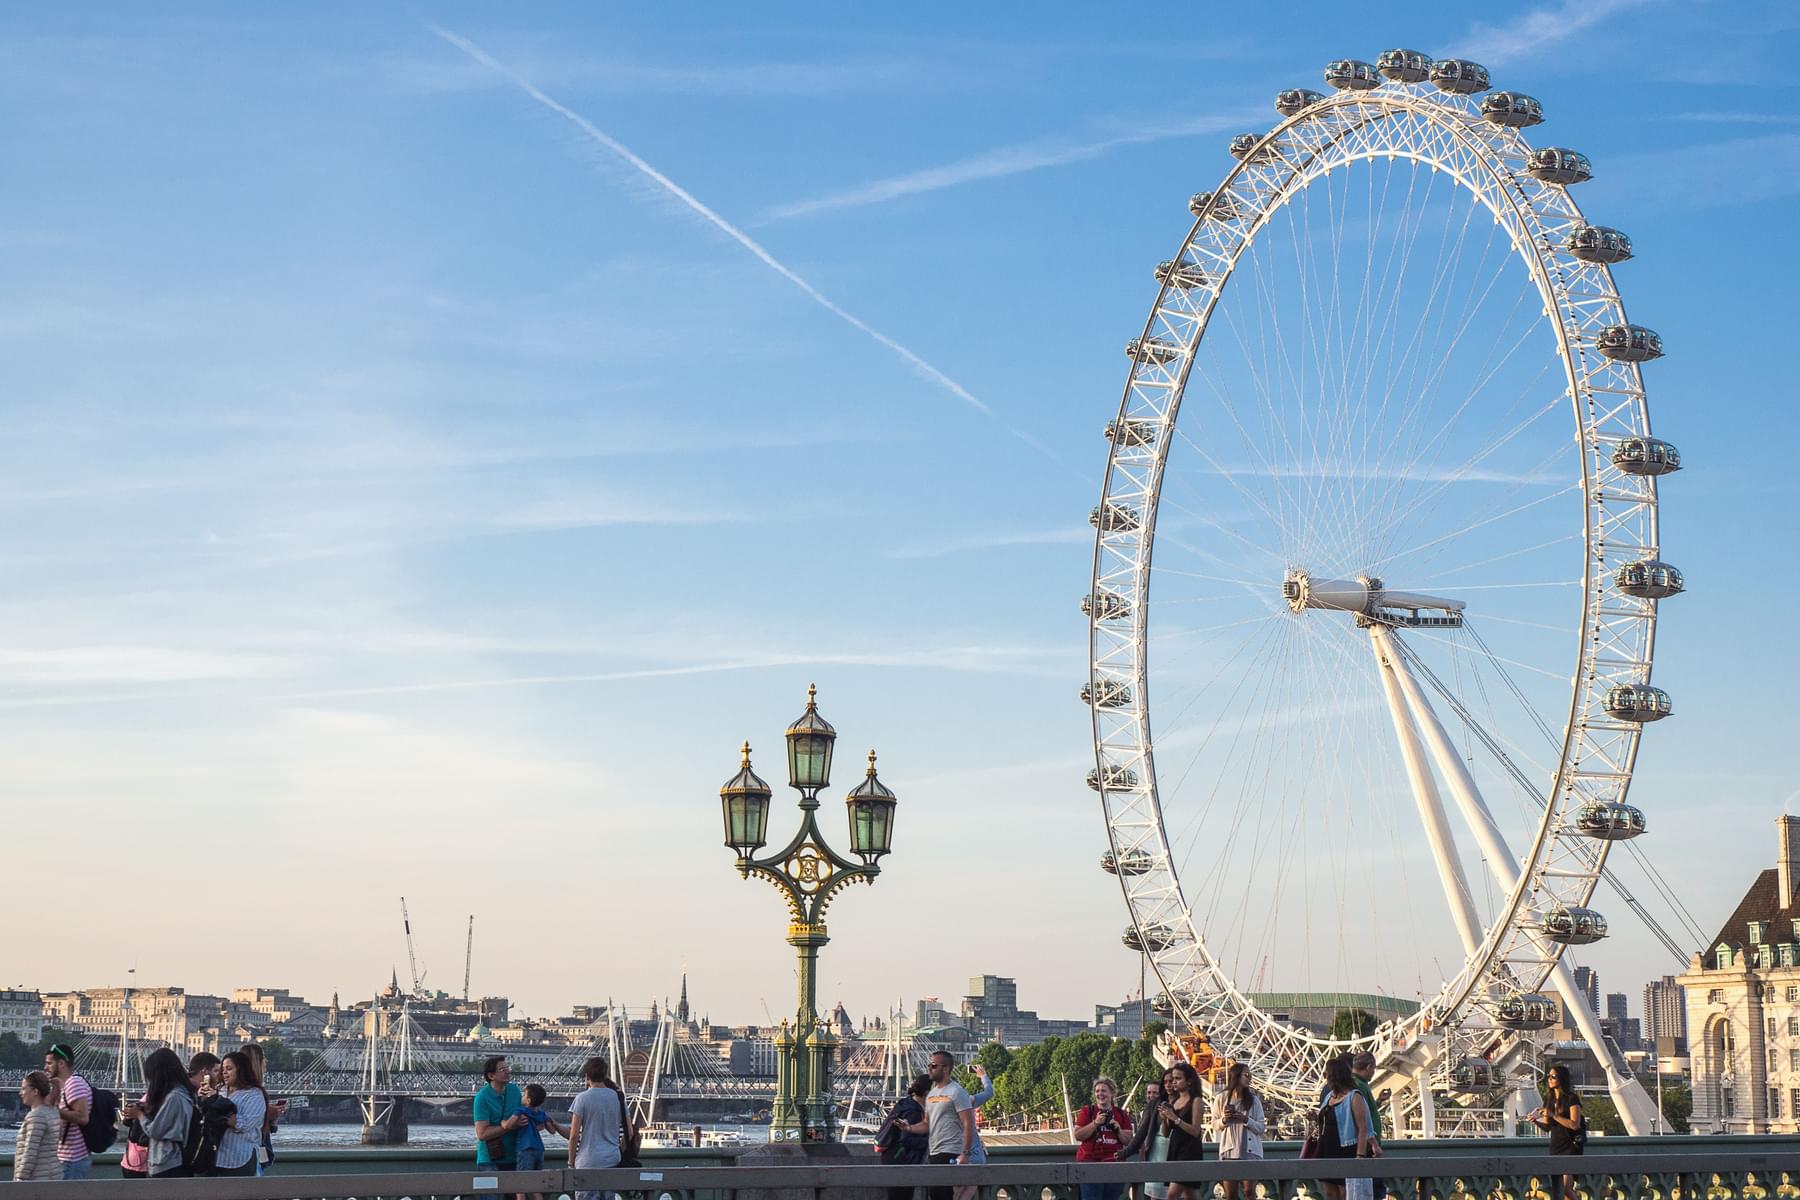  Facts About London Eye